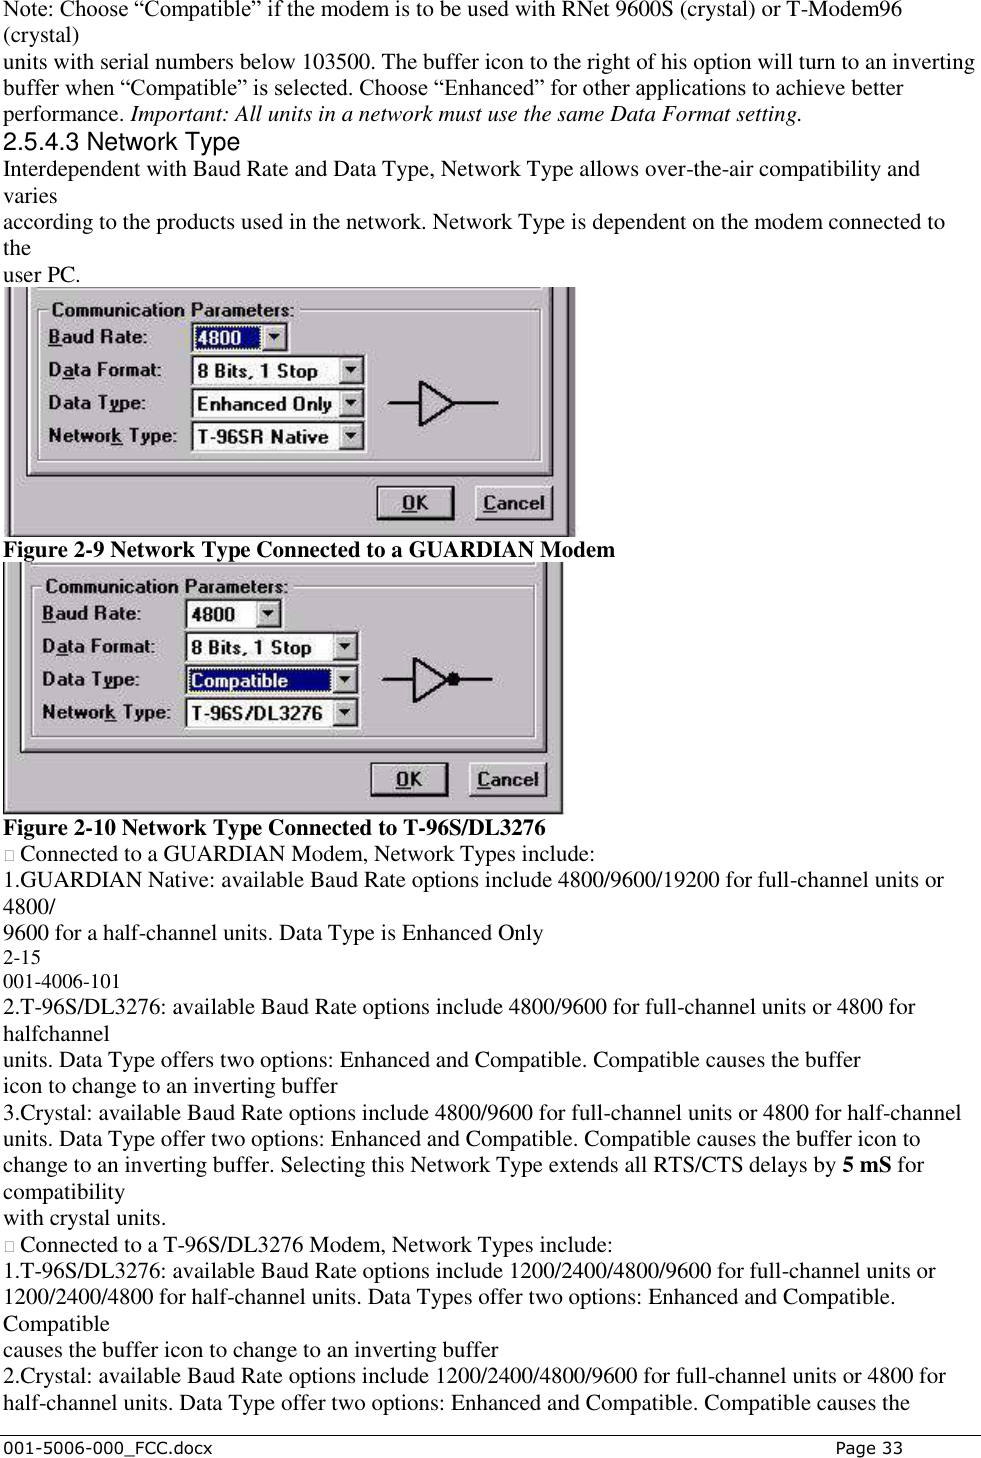  001-5006-000_FCC.docx    Page 33 Note: Choose “Compatible” if the modem is to be used with RNet 9600S (crystal) or T-Modem96 (crystal) units with serial numbers below 103500. The buffer icon to the right of his option will turn to an inverting buffer when “Compatible” is selected. Choose “Enhanced” for other applications to achieve better performance. Important: All units in a network must use the same Data Format setting. 2.5.4.3 Network Type Interdependent with Baud Rate and Data Type, Network Type allows over-the-air compatibility and varies according to the products used in the network. Network Type is dependent on the modem connected to the user PC.  Figure 2-9 Network Type Connected to a GUARDIAN Modem  Figure 2-10 Network Type Connected to T-96S/DL3276 � Connected to a GUARDIAN Modem, Network Types include: 1.GUARDIAN Native: available Baud Rate options include 4800/9600/19200 for full-channel units or 4800/ 9600 for a half-channel units. Data Type is Enhanced Only 2-15 001-4006-101 2.T-96S/DL3276: available Baud Rate options include 4800/9600 for full-channel units or 4800 for halfchannel units. Data Type offers two options: Enhanced and Compatible. Compatible causes the buffer icon to change to an inverting buffer 3.Crystal: available Baud Rate options include 4800/9600 for full-channel units or 4800 for half-channel units. Data Type offer two options: Enhanced and Compatible. Compatible causes the buffer icon to change to an inverting buffer. Selecting this Network Type extends all RTS/CTS delays by 5 mS for compatibility with crystal units. � Connected to a T-96S/DL3276 Modem, Network Types include: 1.T-96S/DL3276: available Baud Rate options include 1200/2400/4800/9600 for full-channel units or 1200/2400/4800 for half-channel units. Data Types offer two options: Enhanced and Compatible. Compatible causes the buffer icon to change to an inverting buffer 2.Crystal: available Baud Rate options include 1200/2400/4800/9600 for full-channel units or 4800 for half-channel units. Data Type offer two options: Enhanced and Compatible. Compatible causes the 